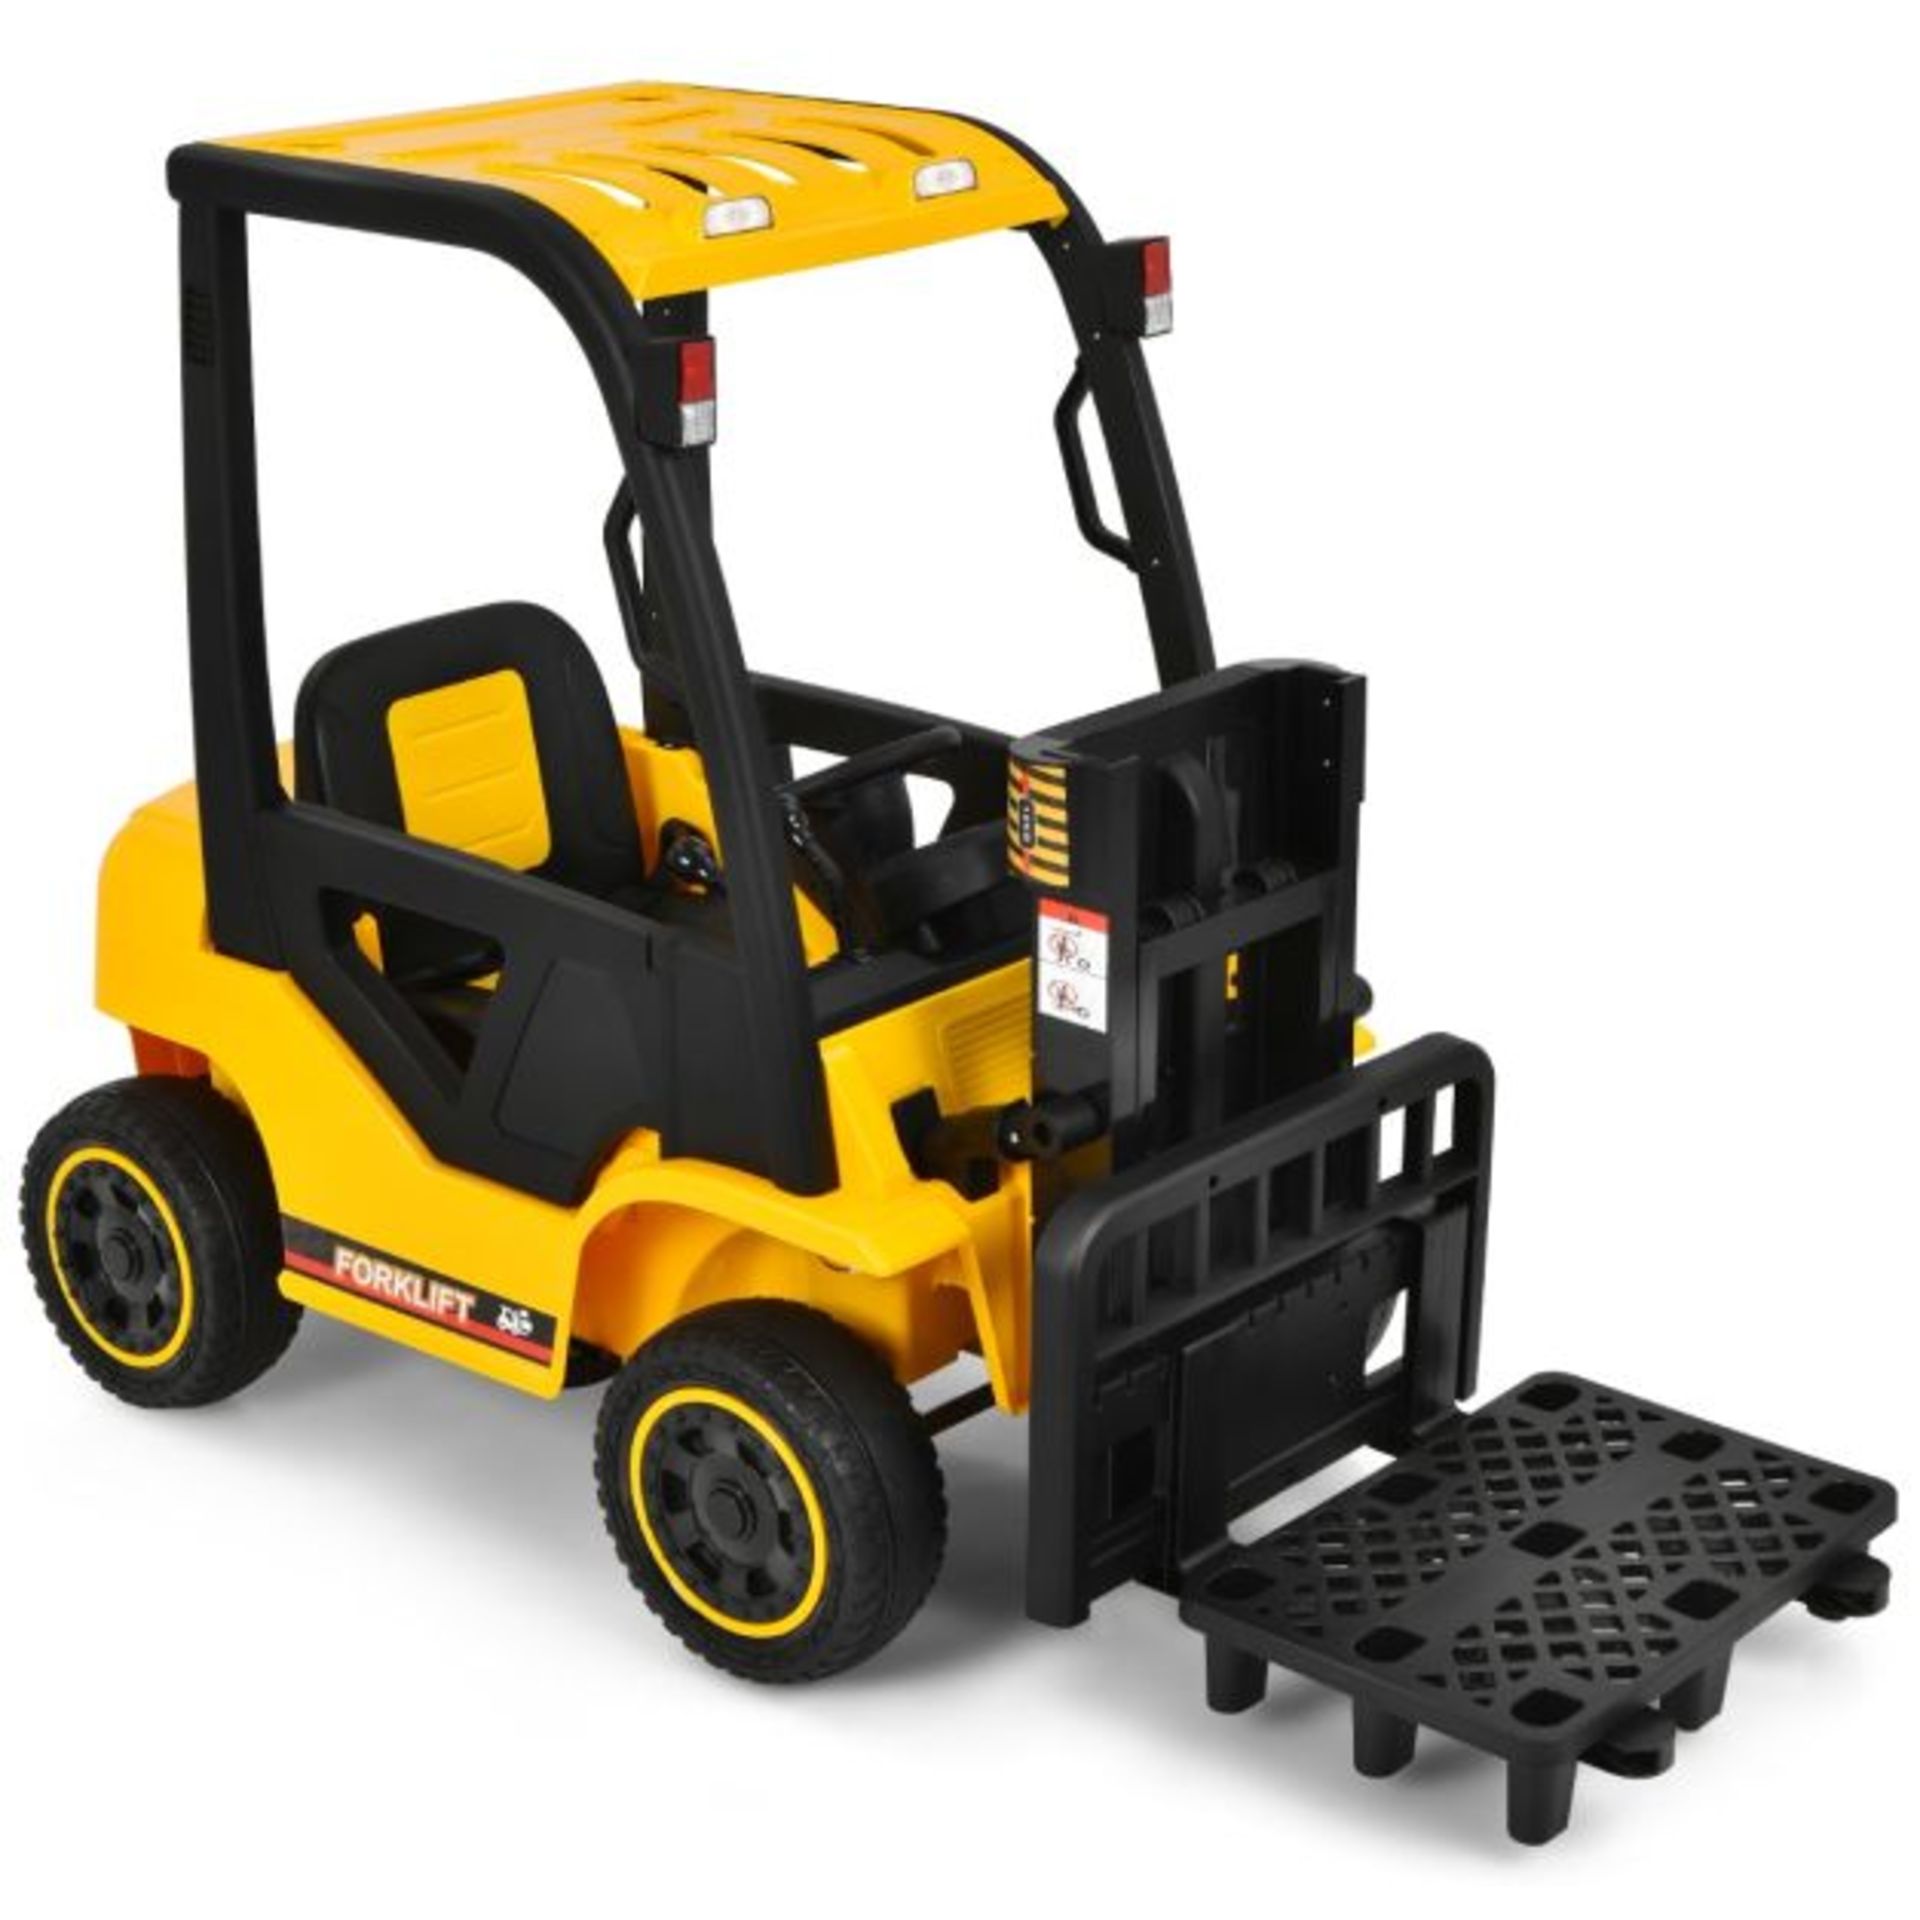 Kids Electric Ride on Forklift with Remote Control. - sR36. The moving arm fork goes up and down; an